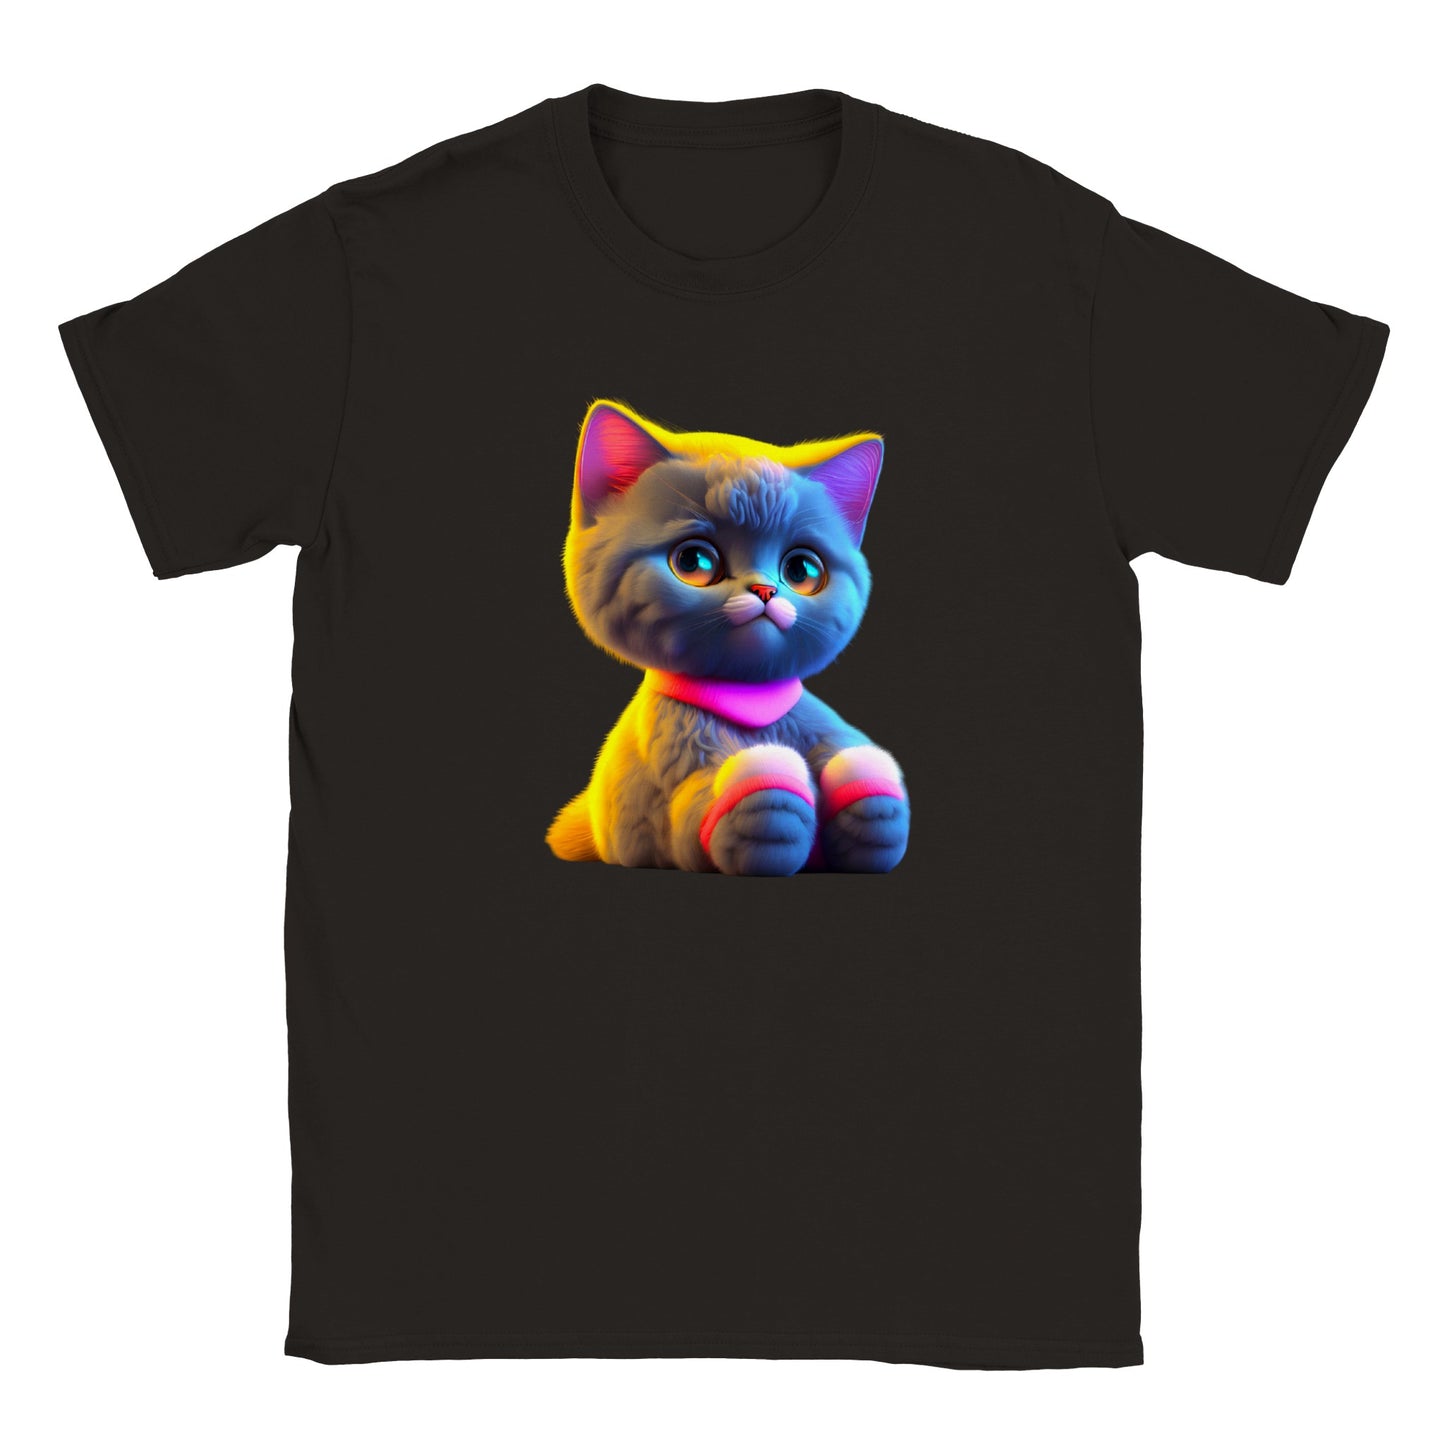 Adorable, Cool, Cute Cats and Kittens Toy - Classic Kids Crewneck T-Shirt 41